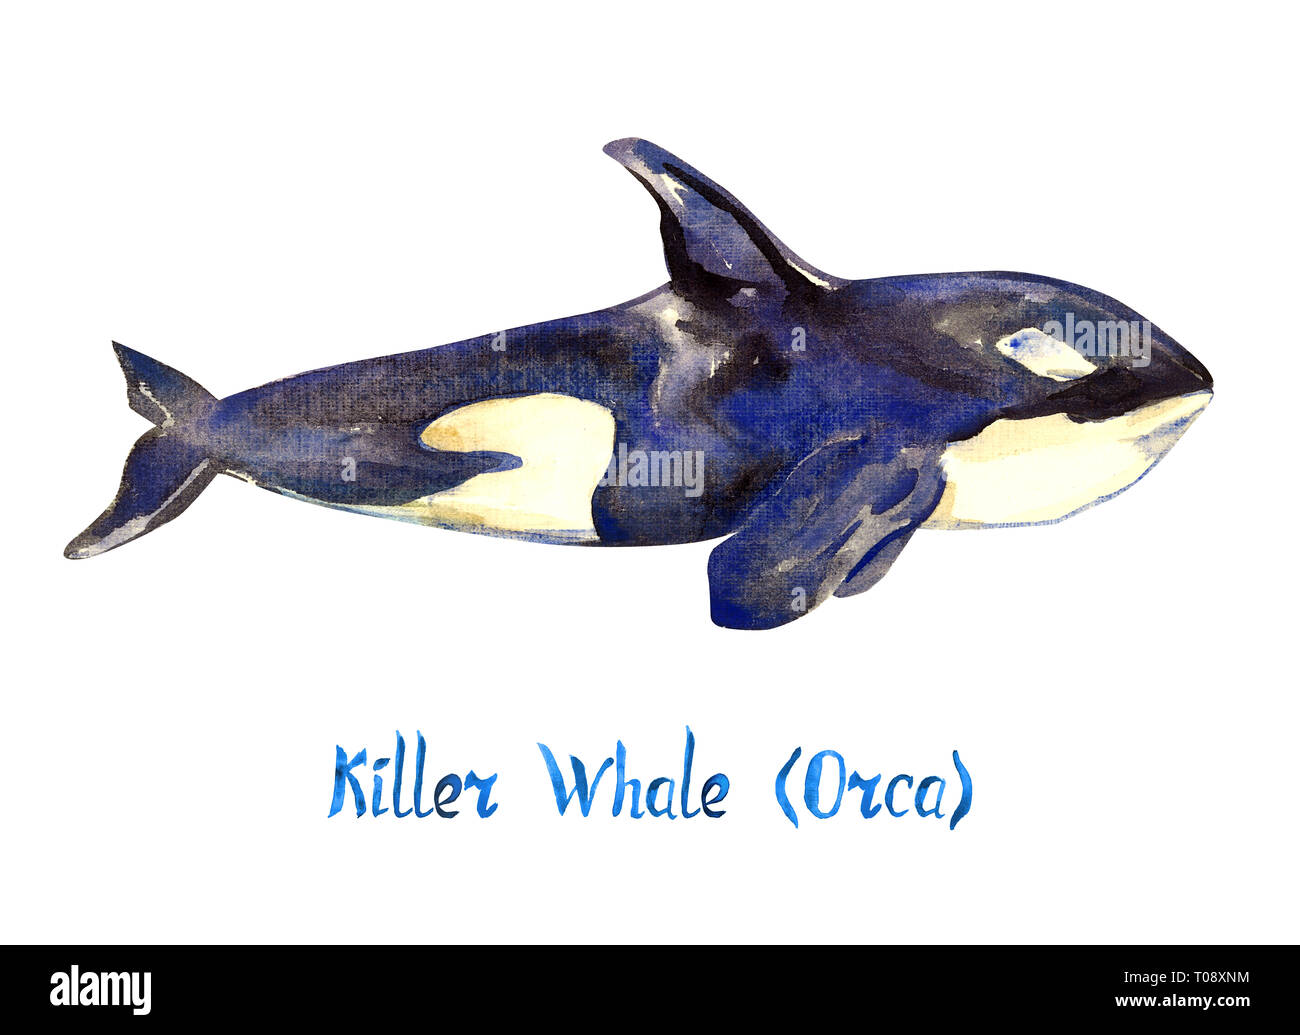 Killer whale (Orca), isolated on white background hand painted watercolor illustration with handwritten inscription Stock Photo